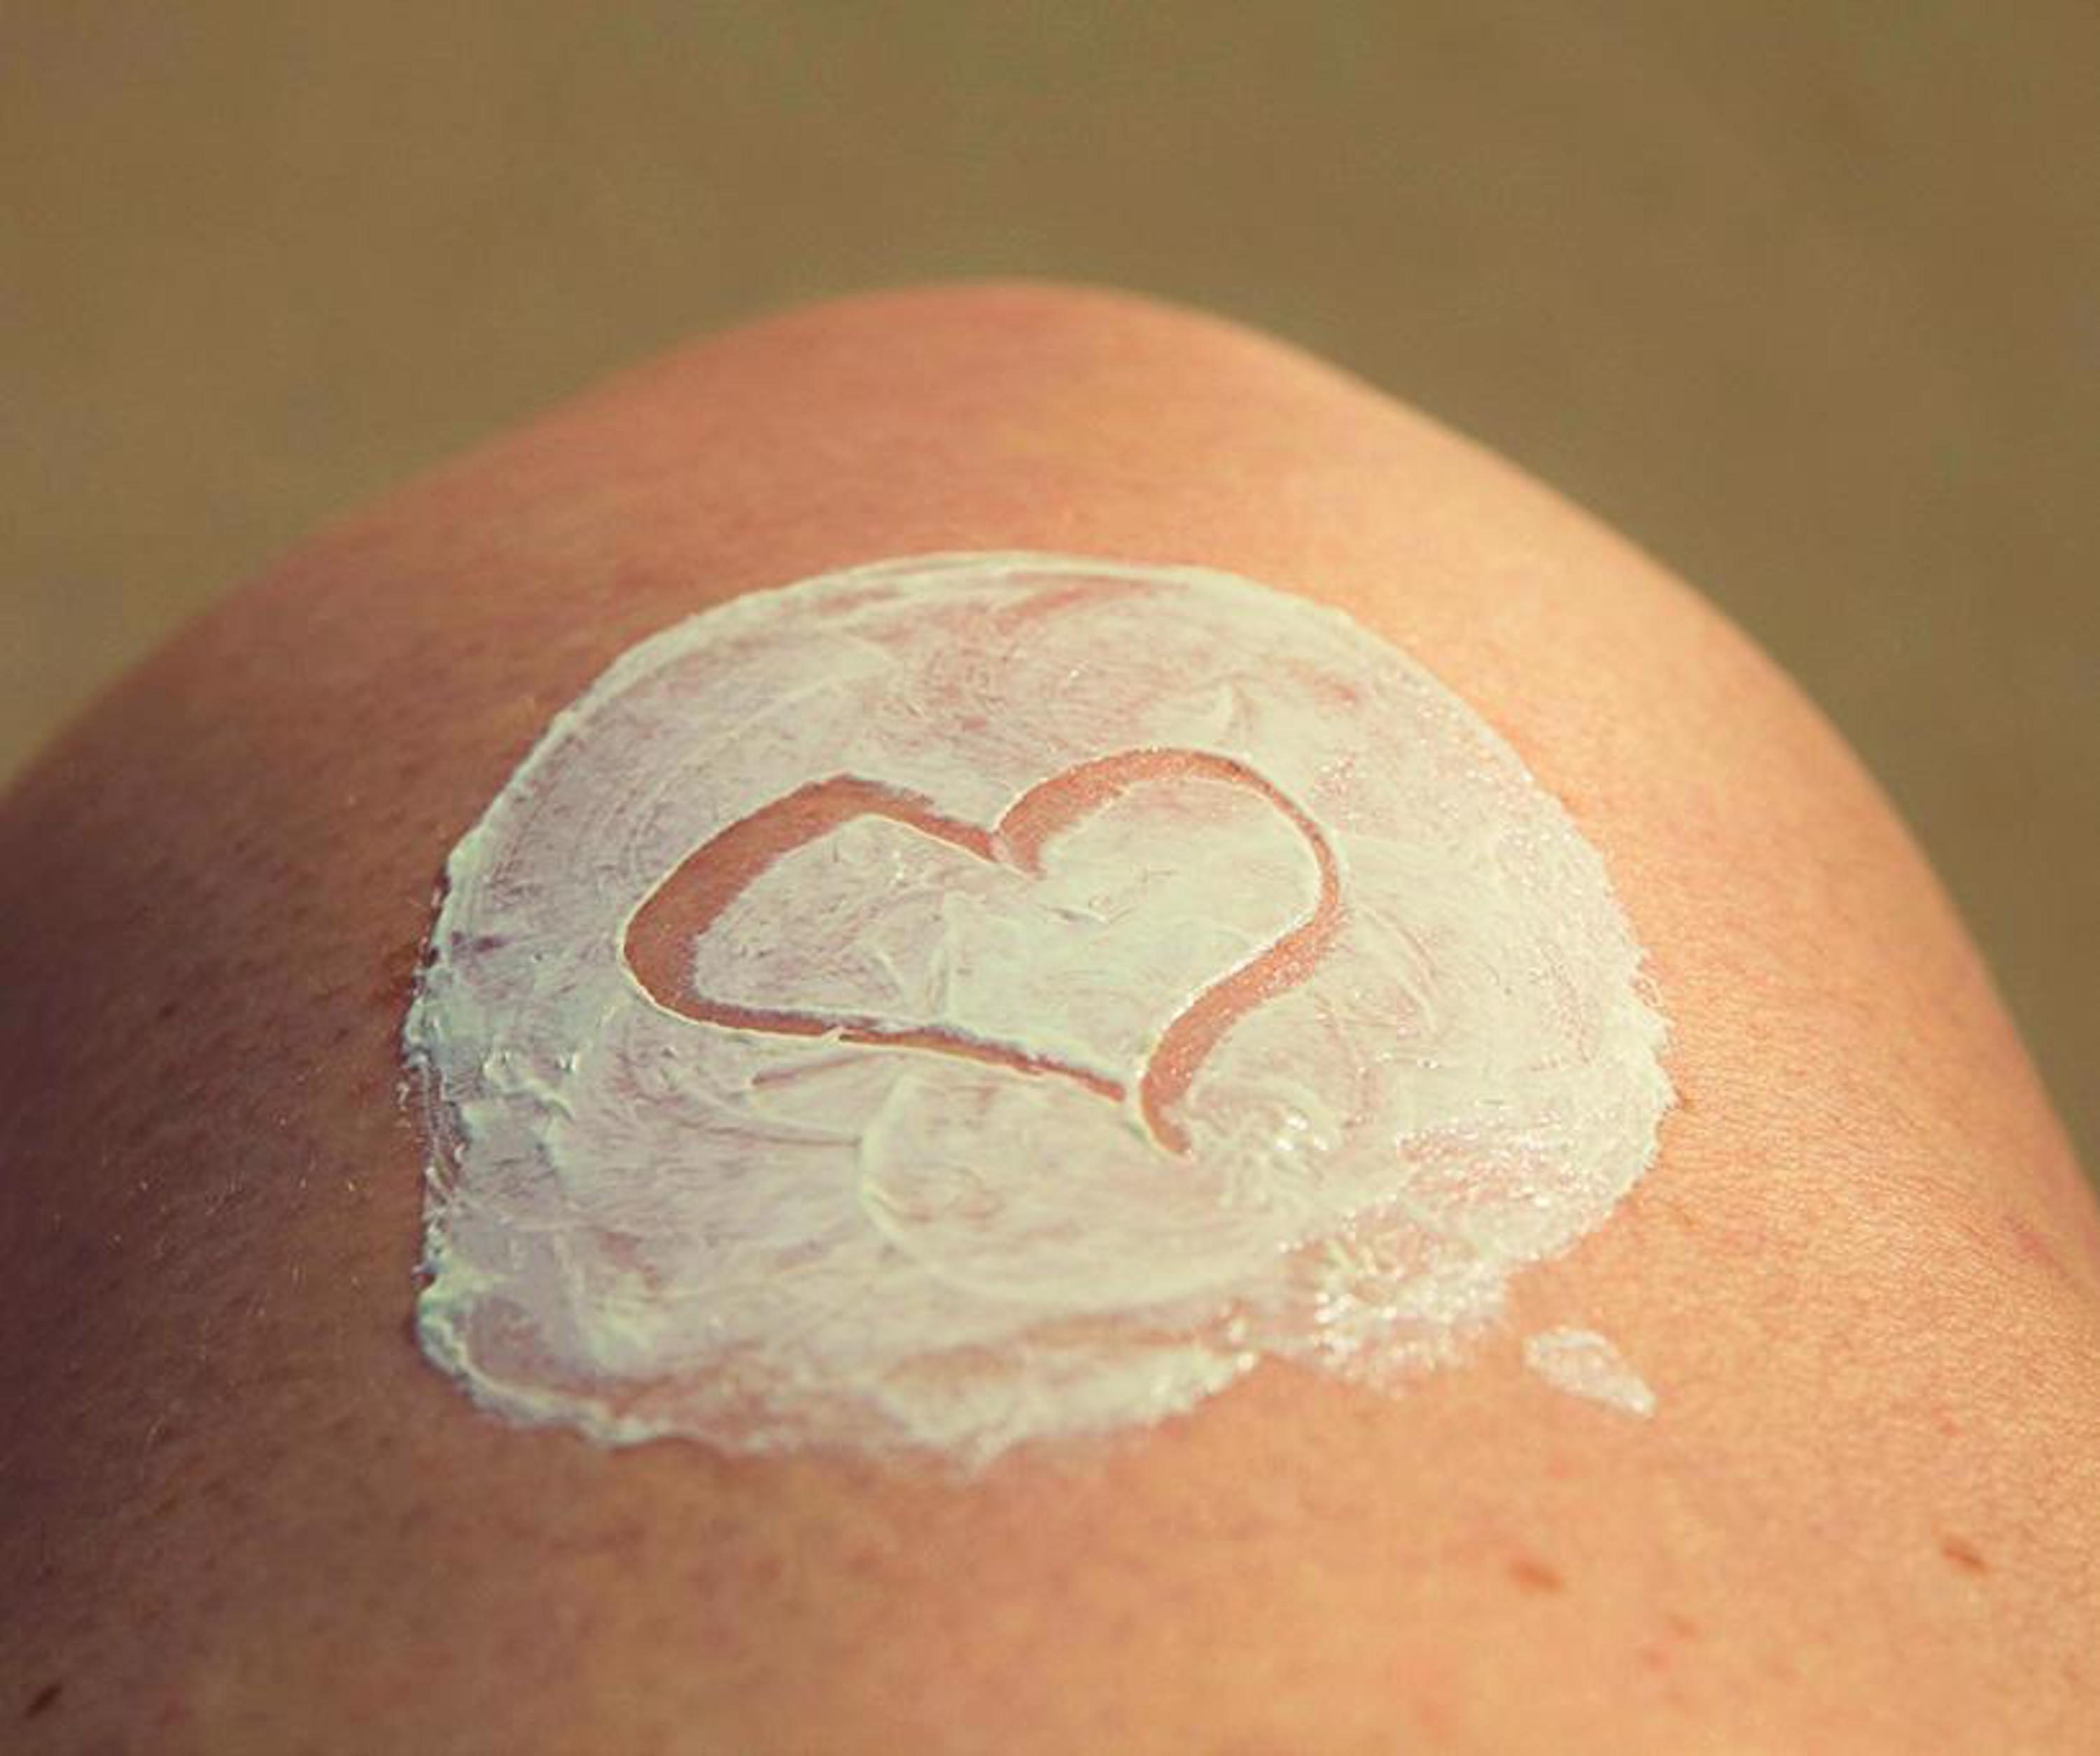 persons knee with heart drawn in lotion